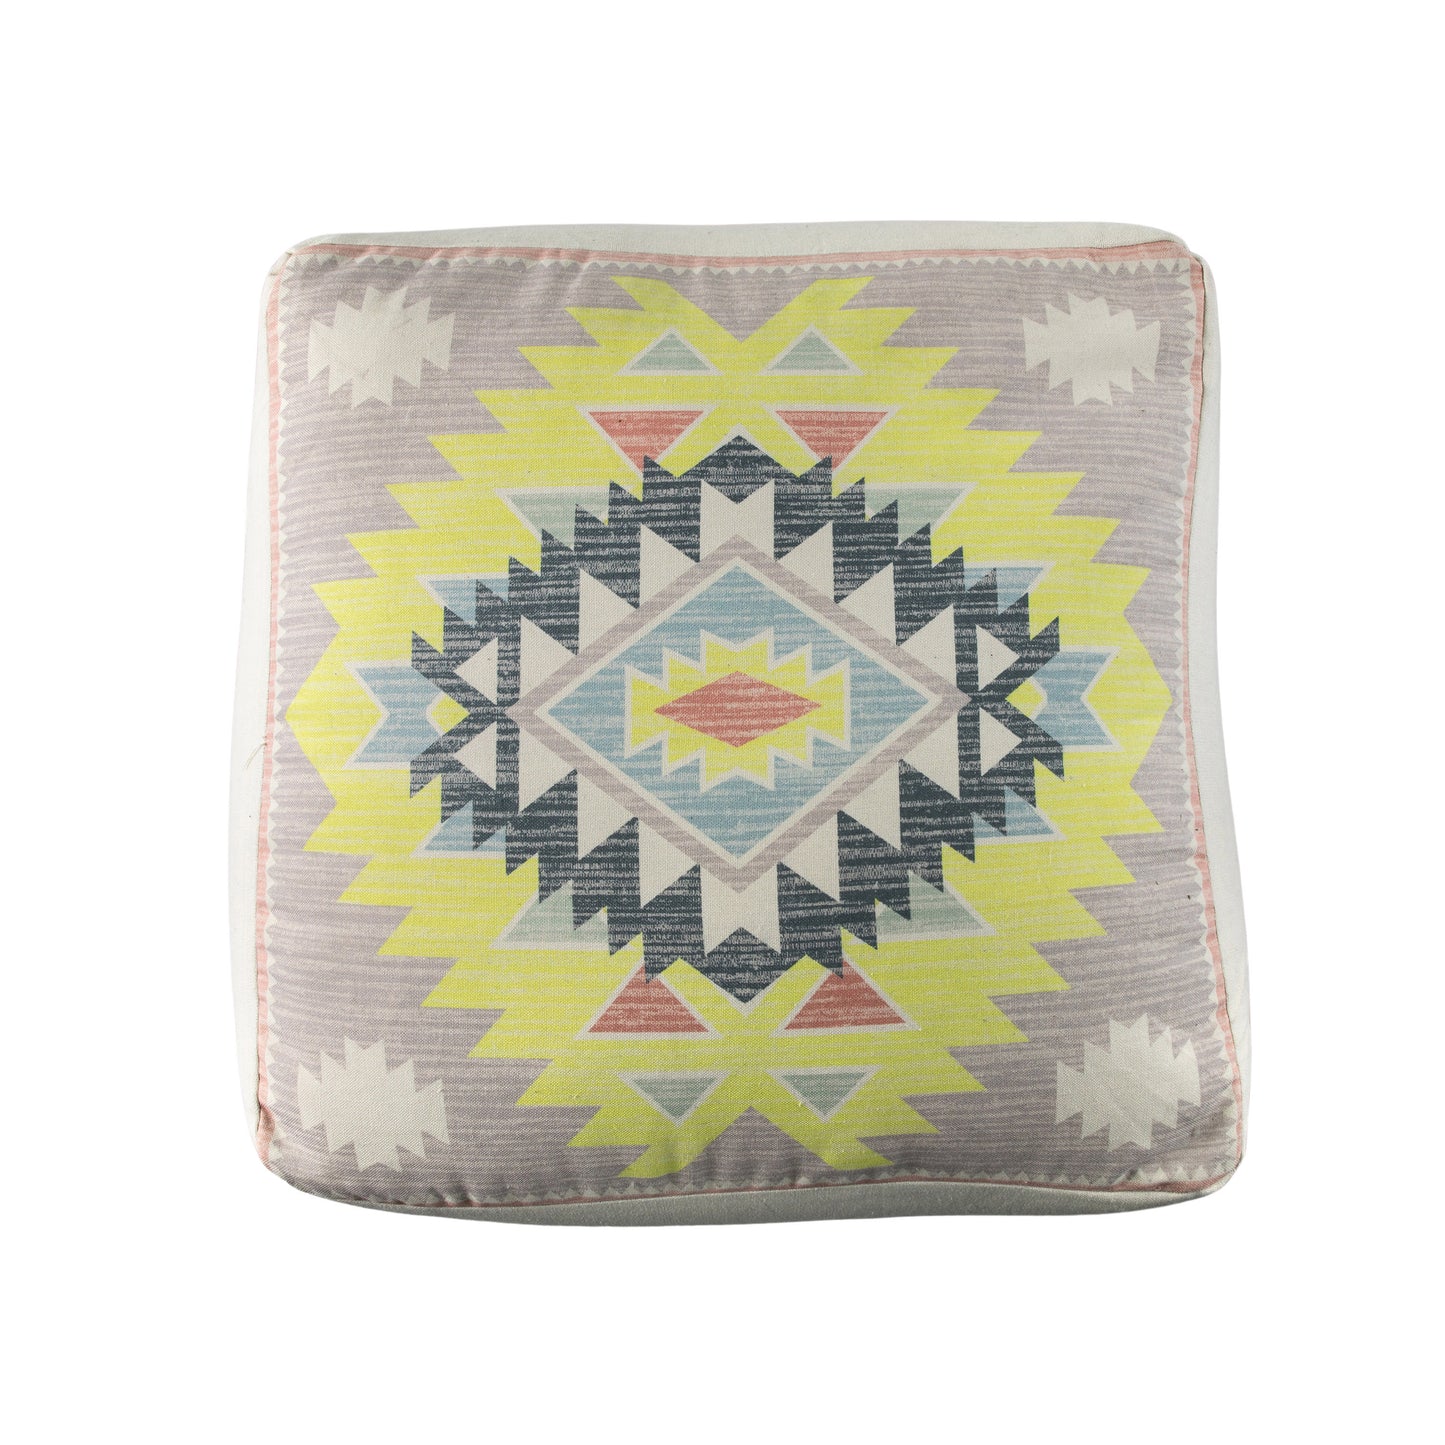 A Global Dia Pouffe Multi 800x800x350mm pillow with a southwestern design, perfect for home furniture and interior decor.